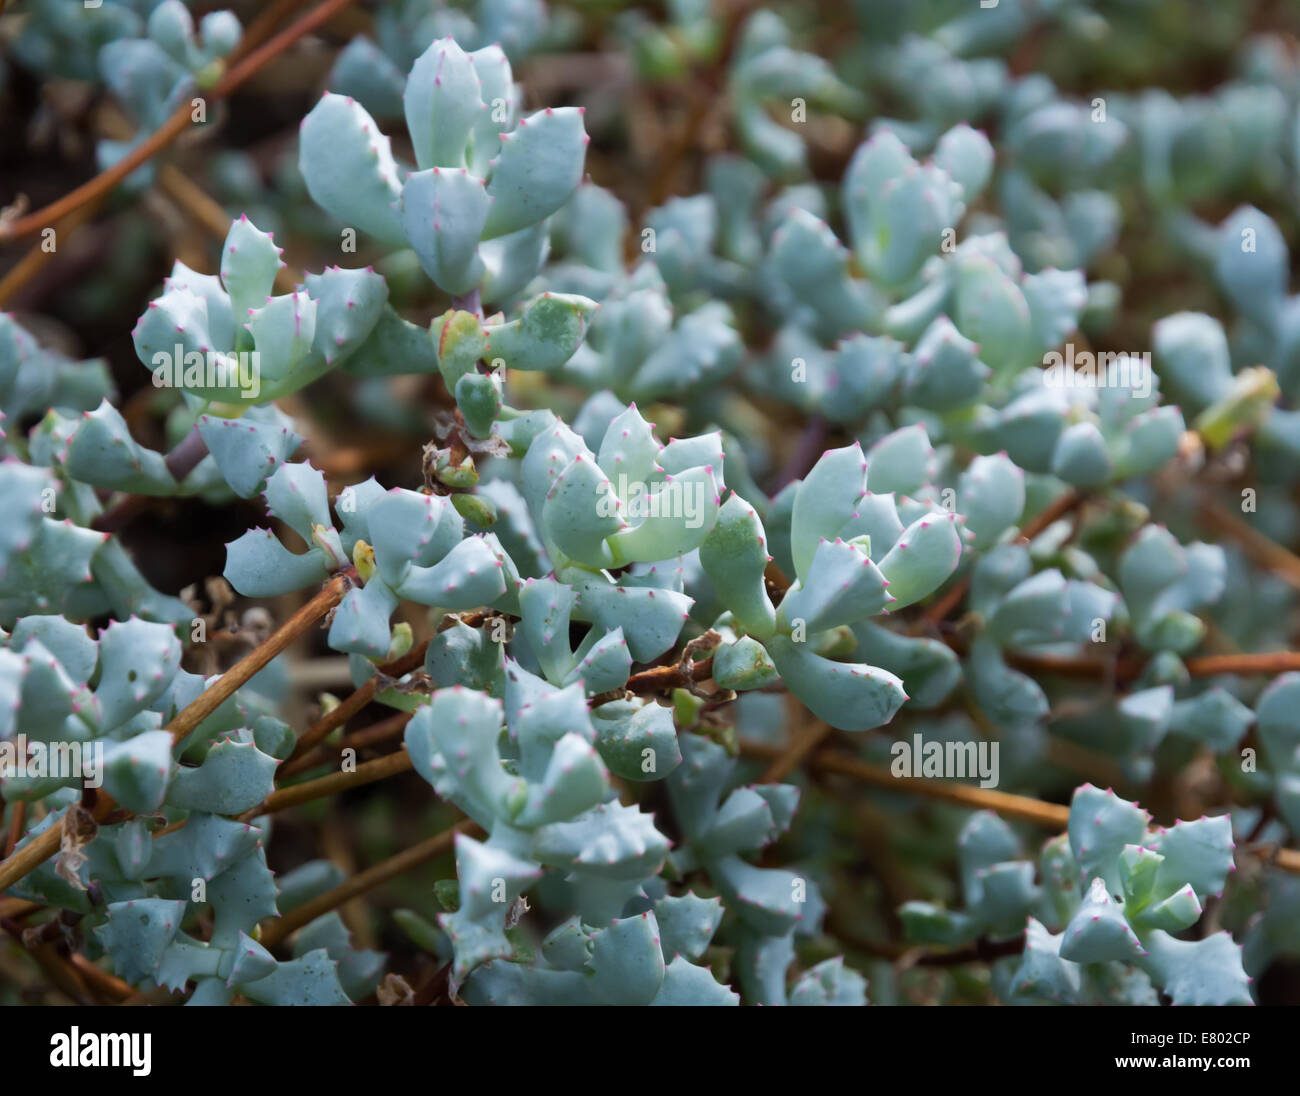 Oscularia deltoides, Lampranthus Multiradiatus or a common name" Wedgewood". Name has been changed recently to Pink Ice Plant. Stock Photo